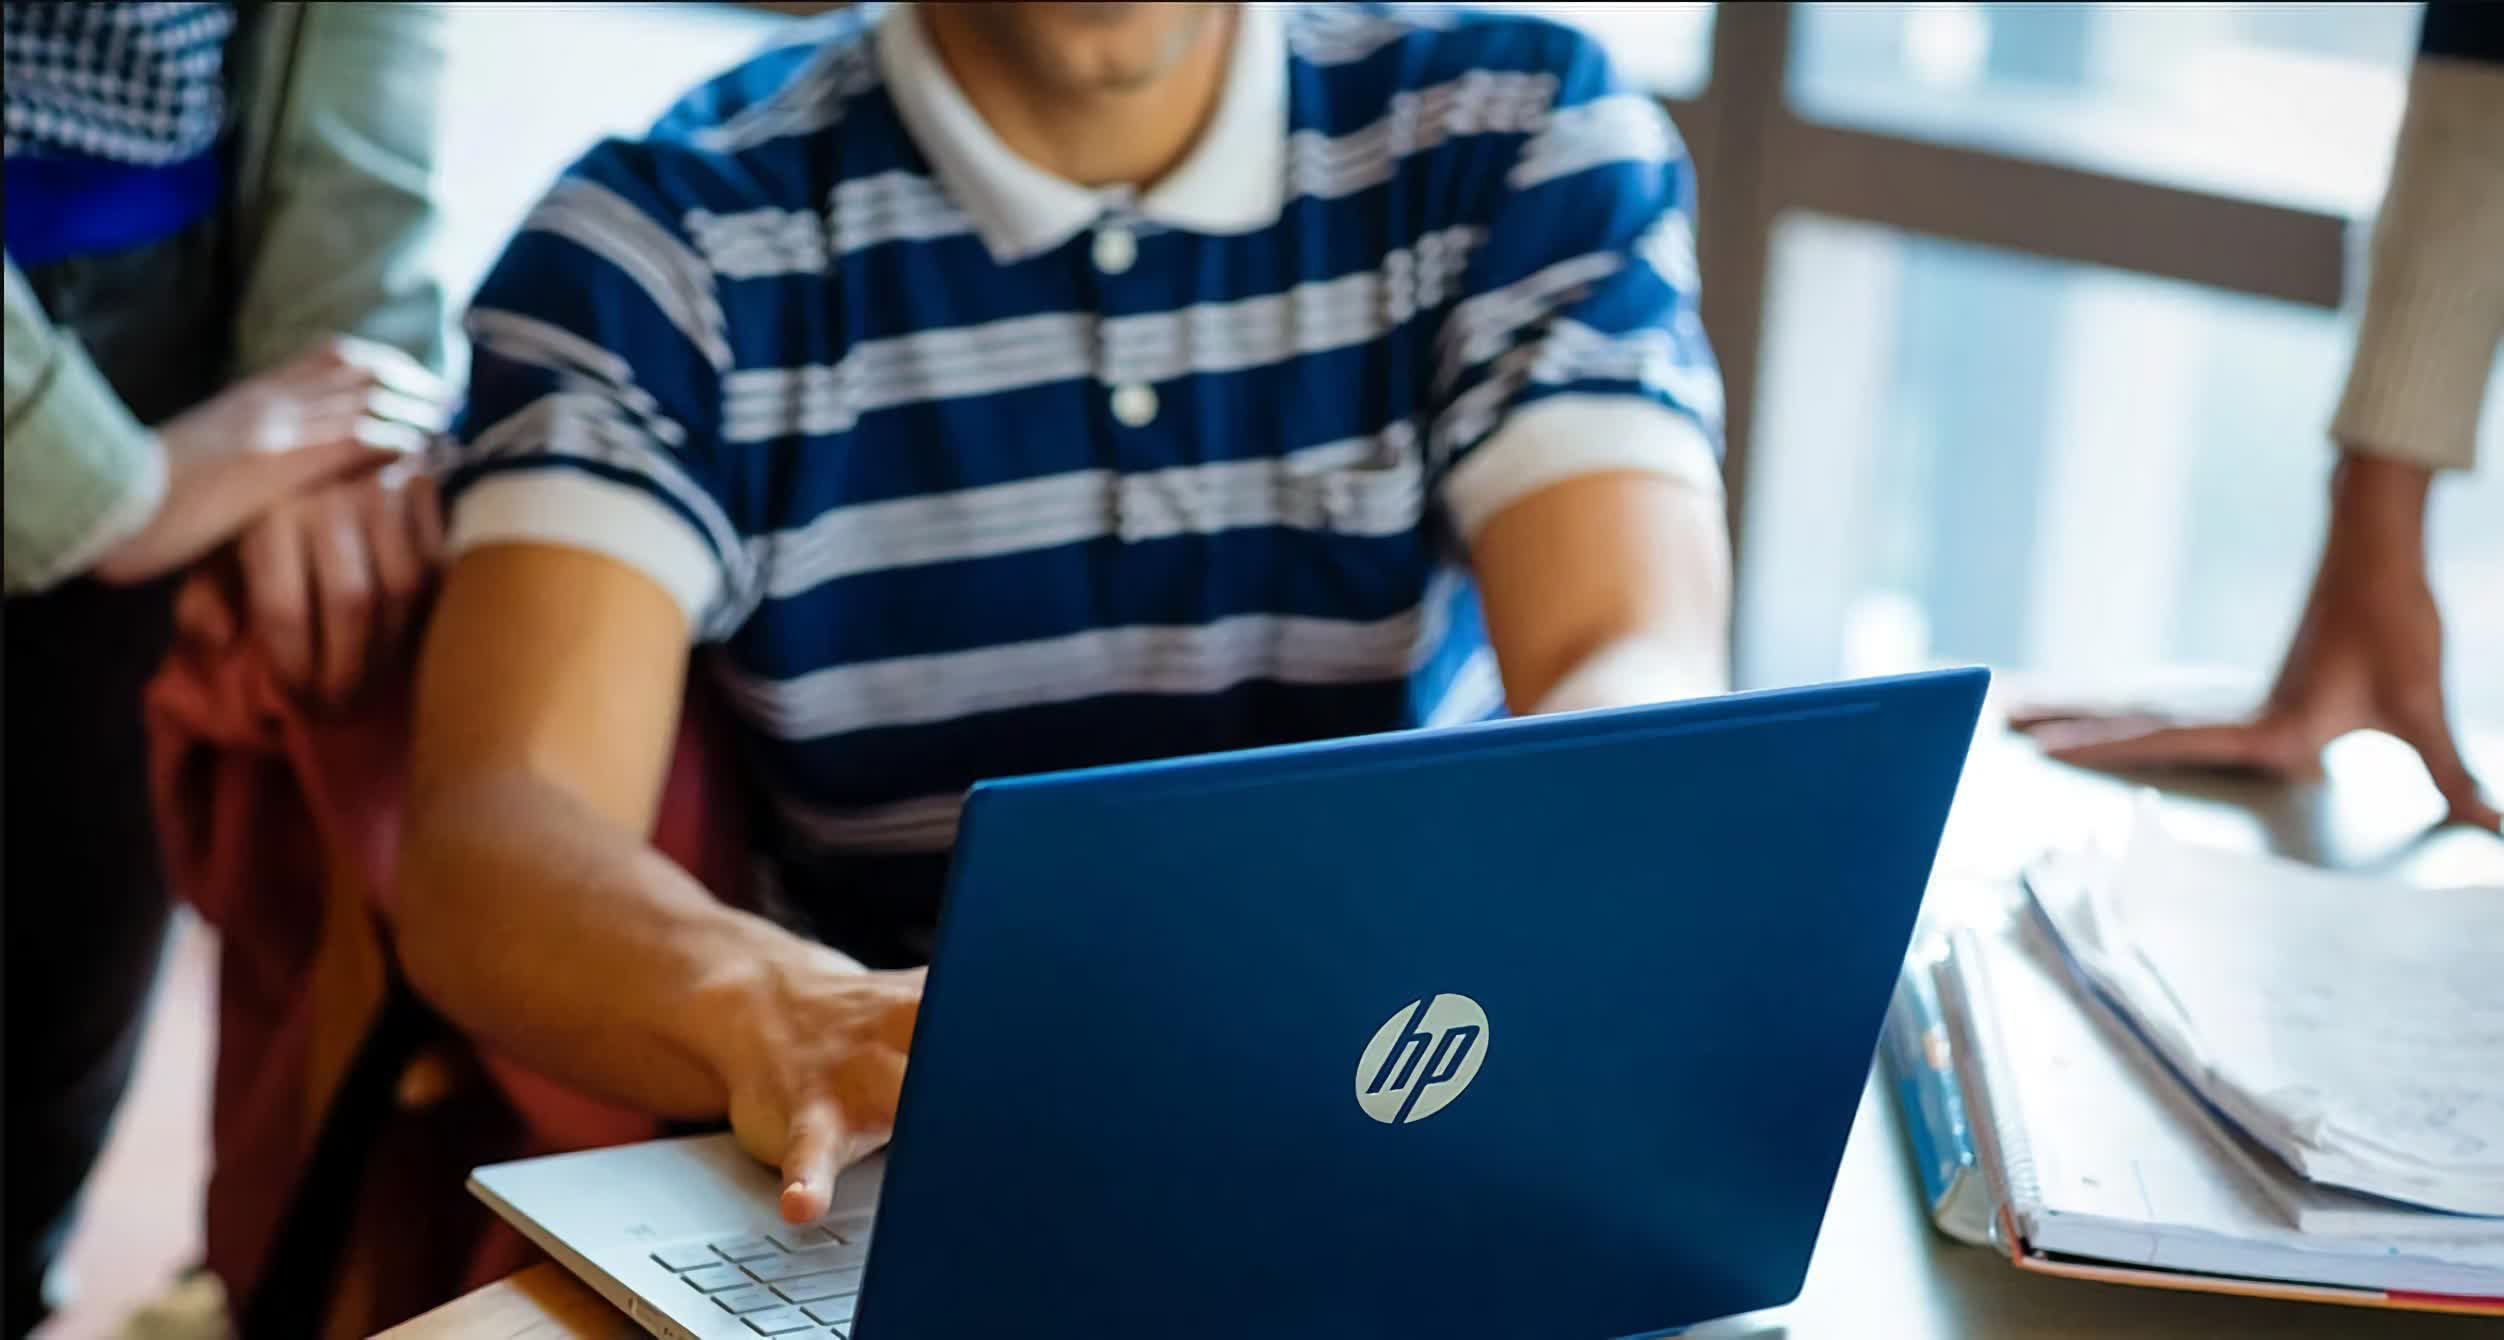 Don't miss great savings on laptops, monitors, and accessories during HP Cyber Monday Sale